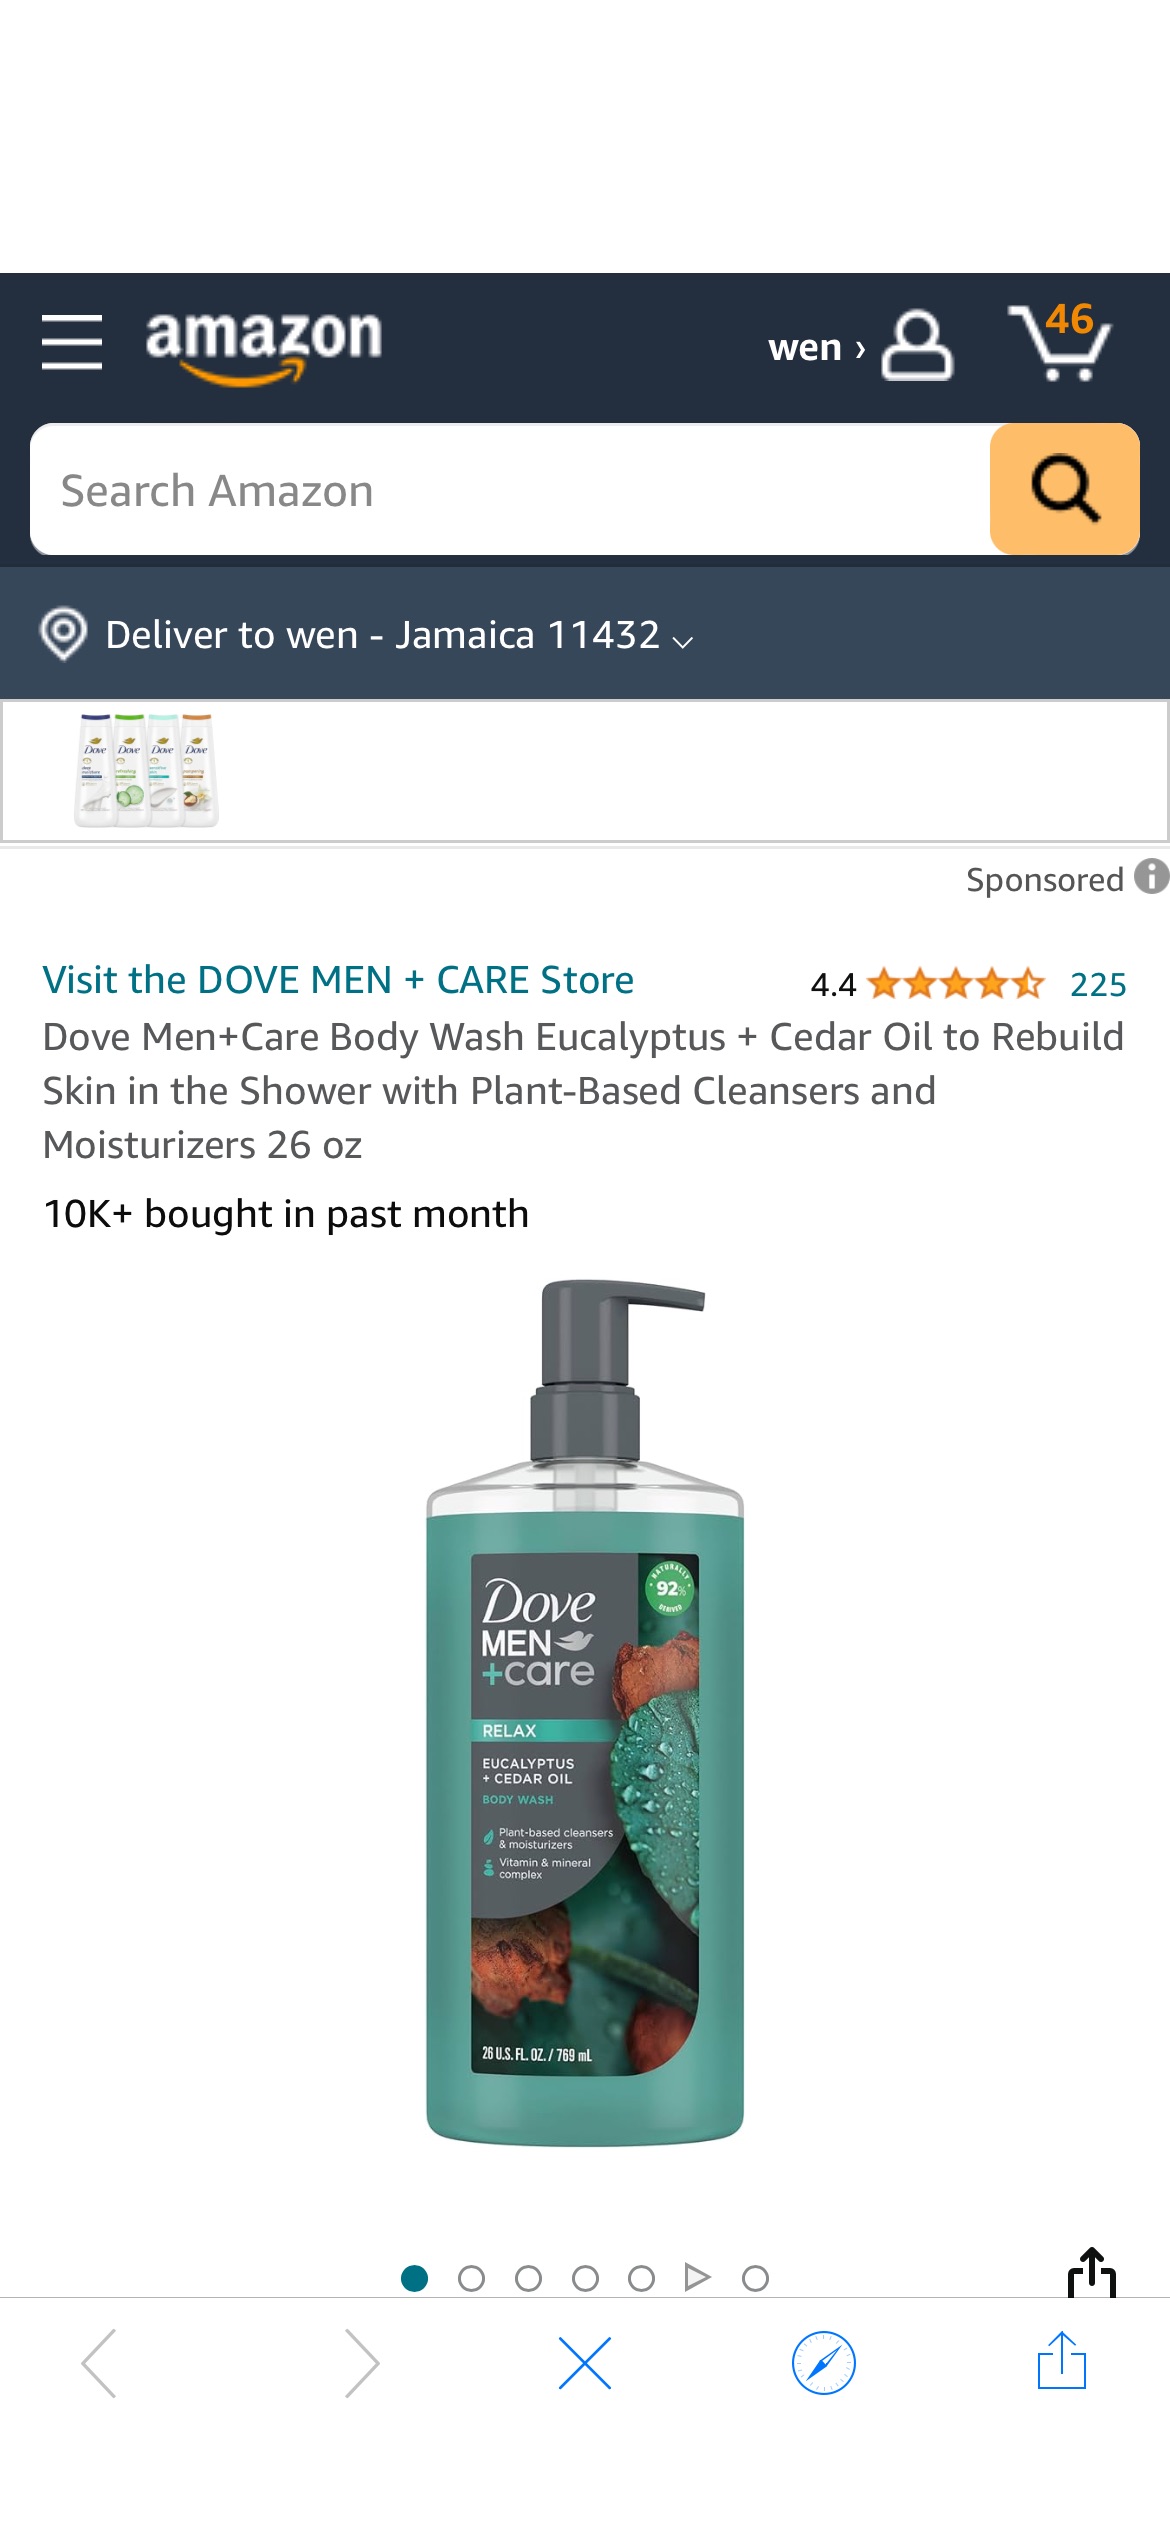 Amazon.com : Dove Men+Care Body Wash Eucalyptus + Cedar Oil to Rebuild Skin in the Shower with Plant-Based Cleansers and Moisturizers 26 oz : Beauty & Personal Care